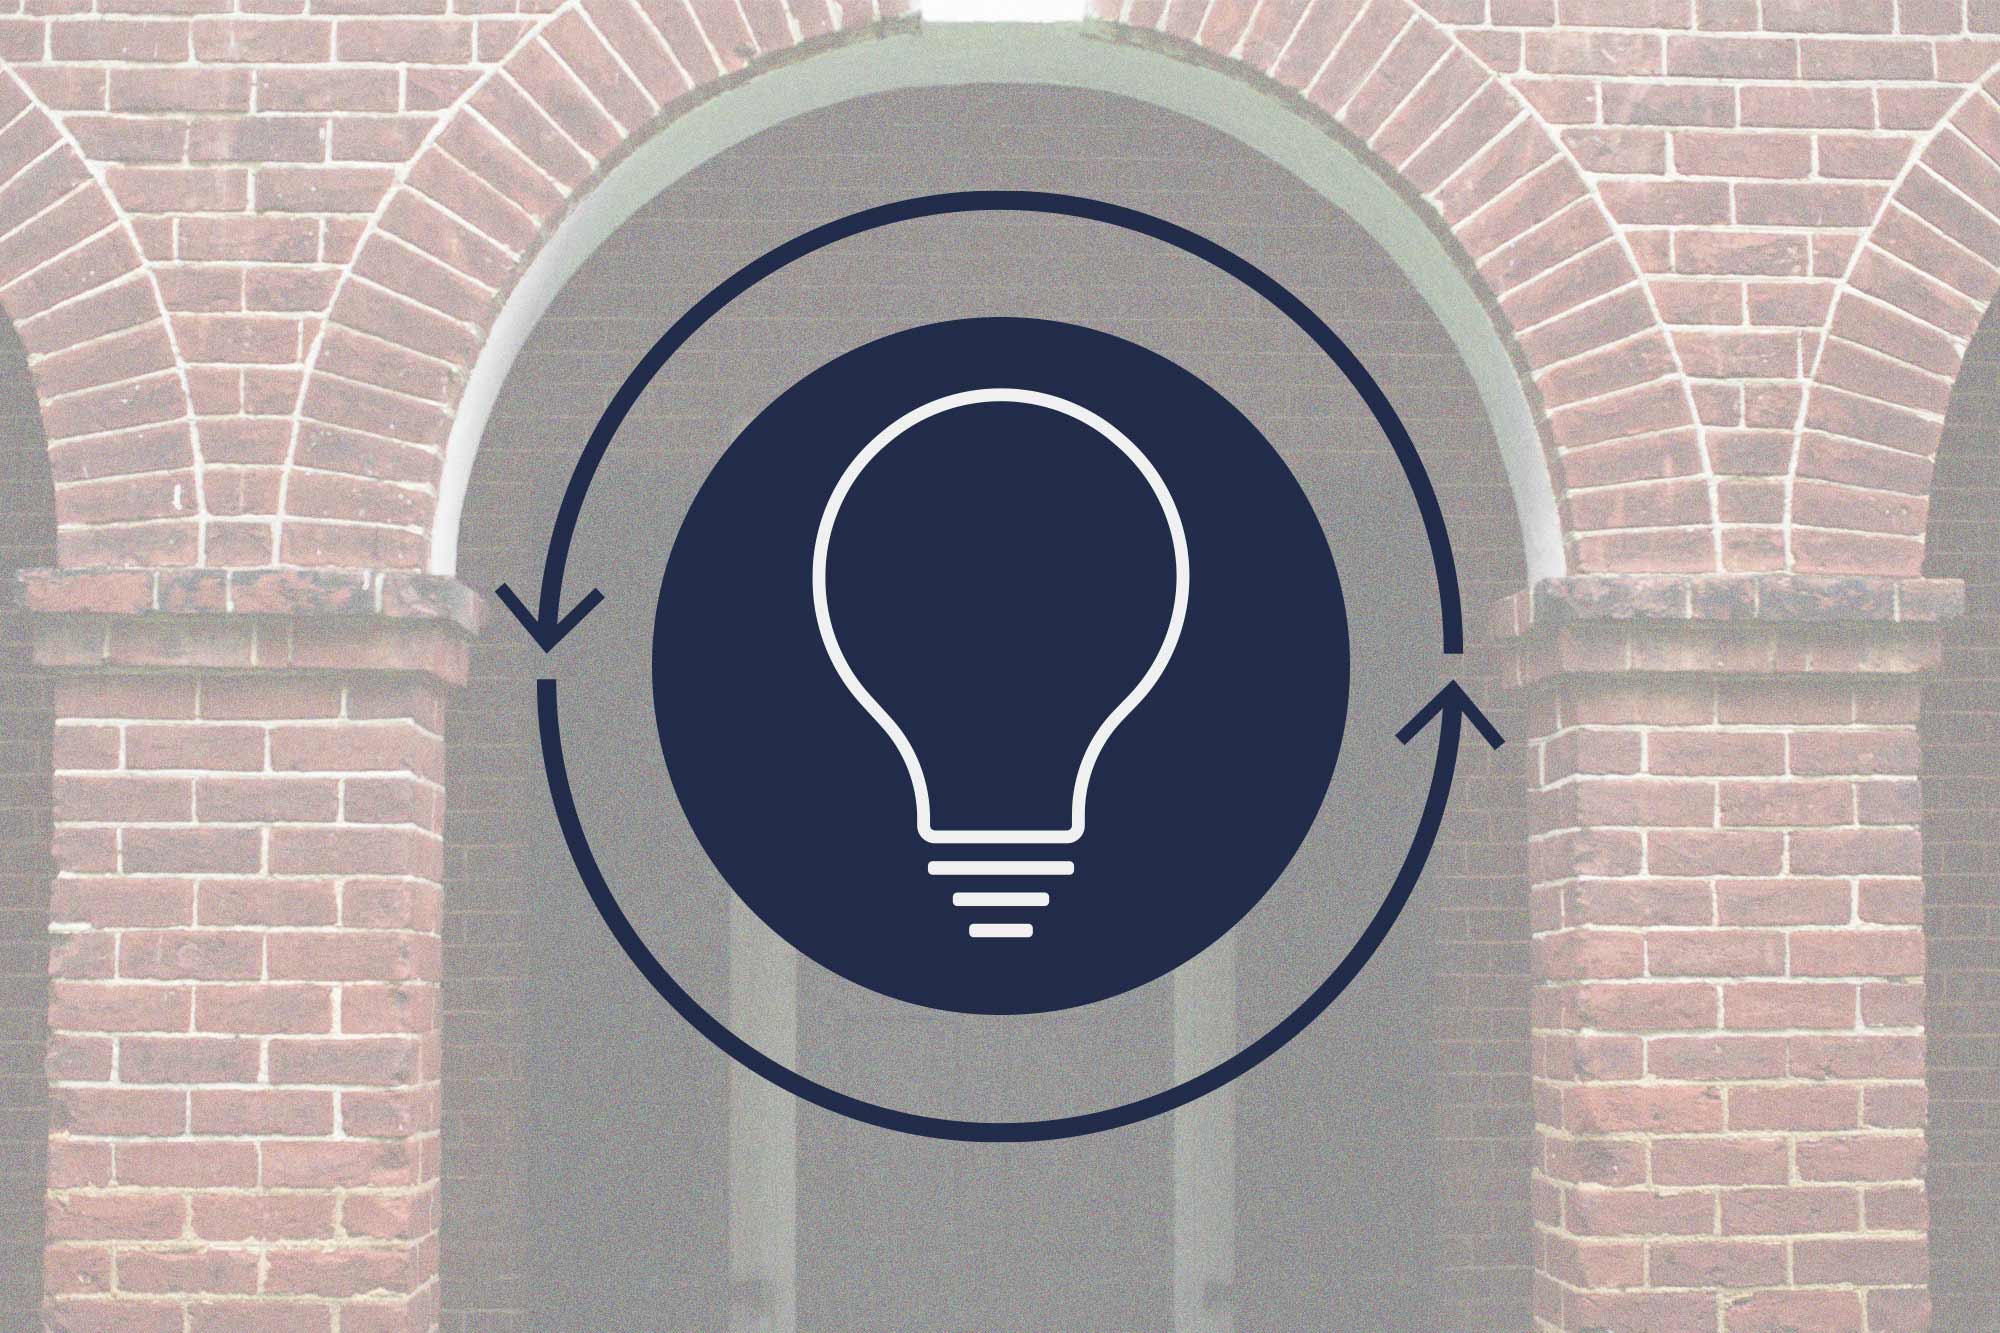 A photo illustration of a light bulb within a blue circle, surrounded by rotating arrows in front of brick pillars.